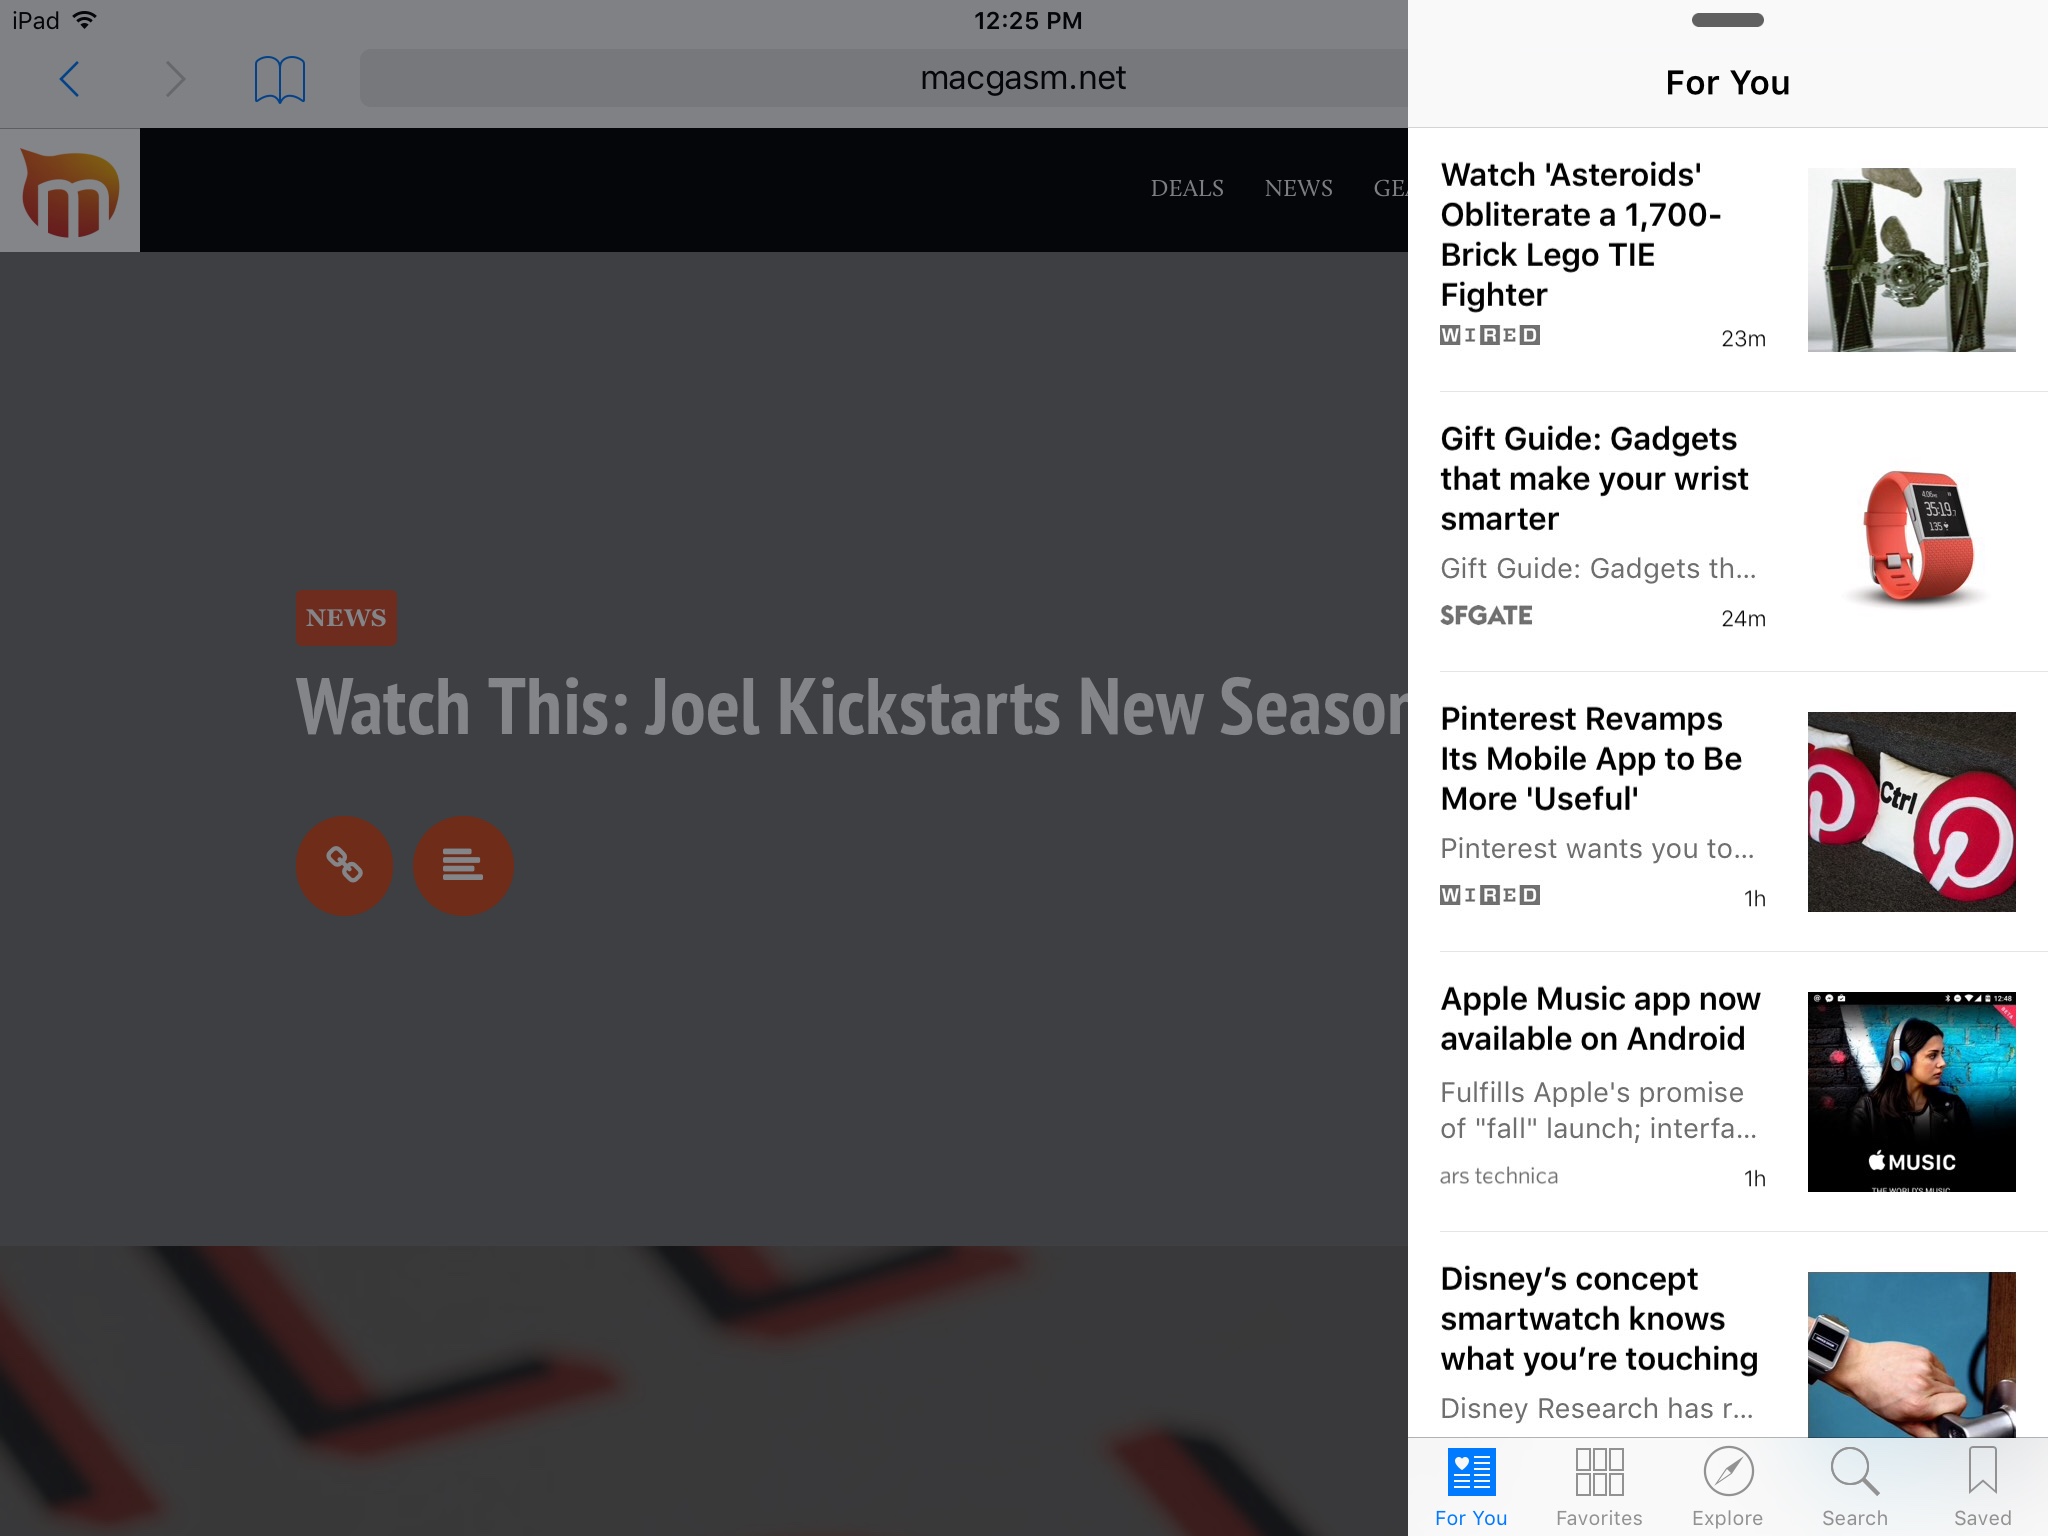 Browsing through the News app in Slide Over view.